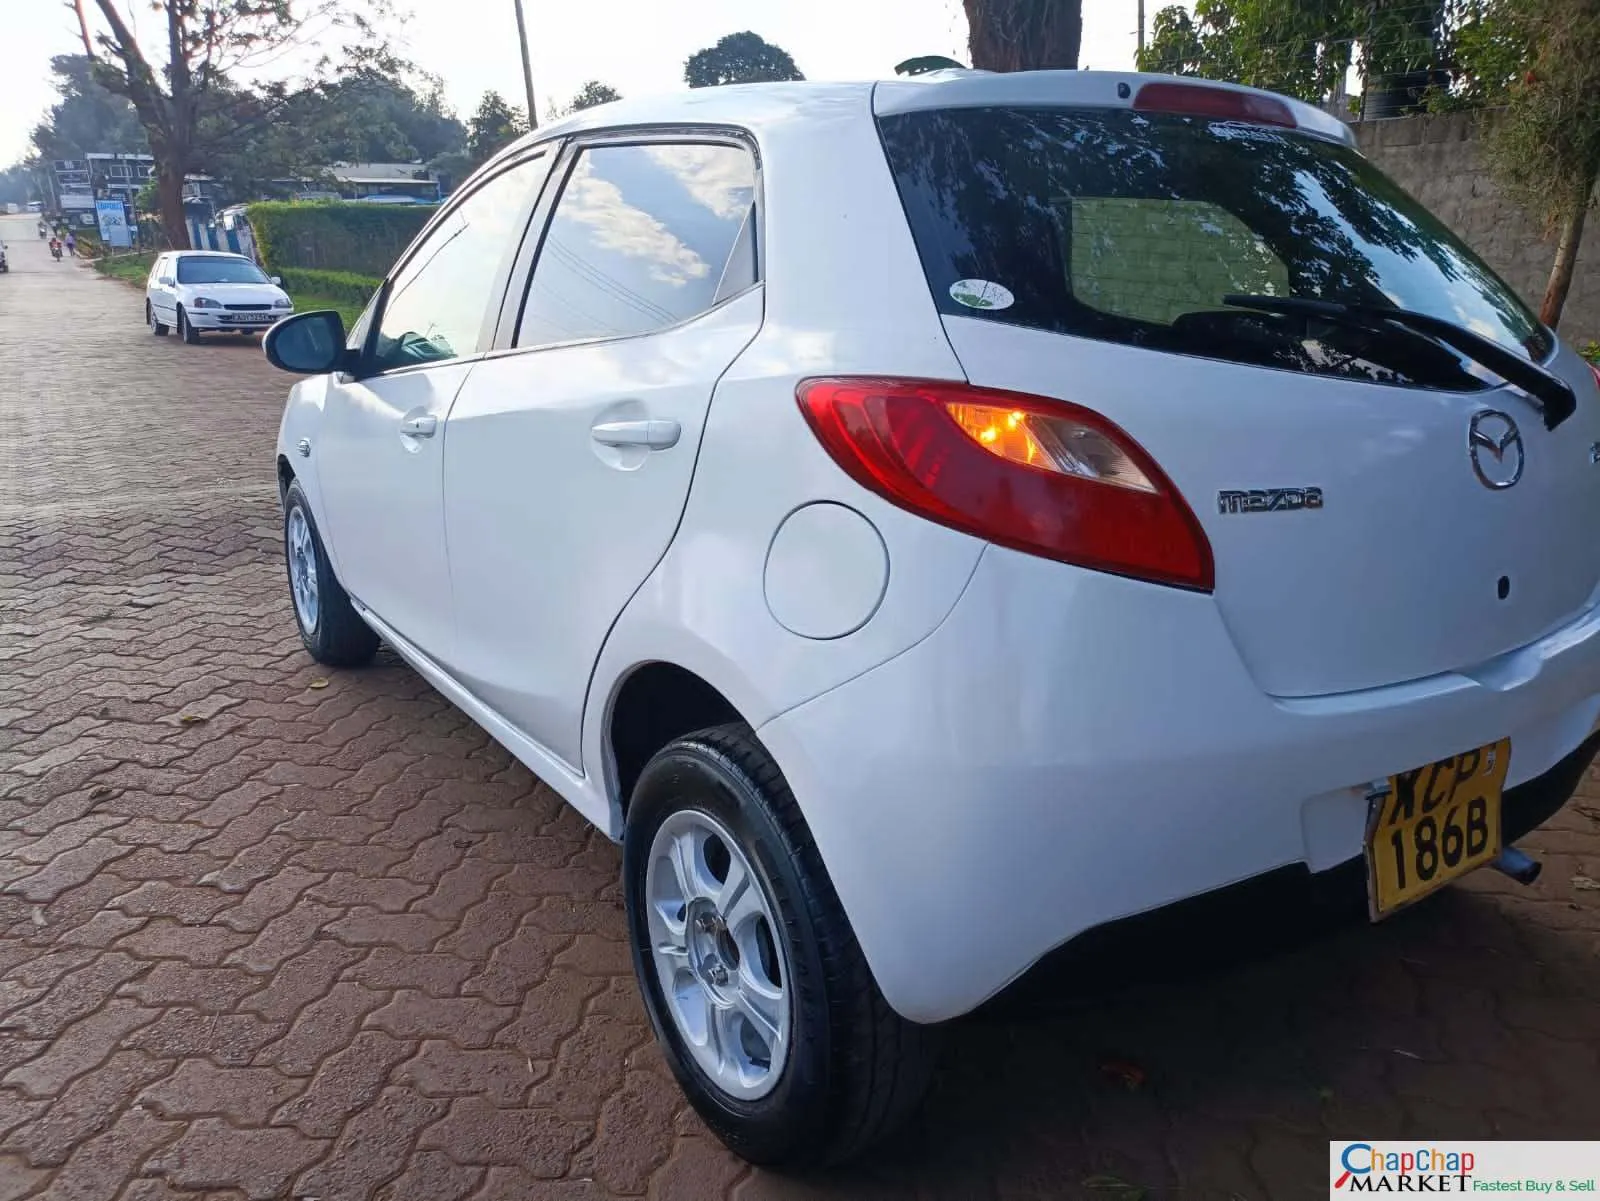 Cars Cars For Sale-Mazda Demio for Sale in kenya You Pay 30% DEPOSIT TRADE IN OK EXCLUSIVE hire purchase installments bank finance ok 9